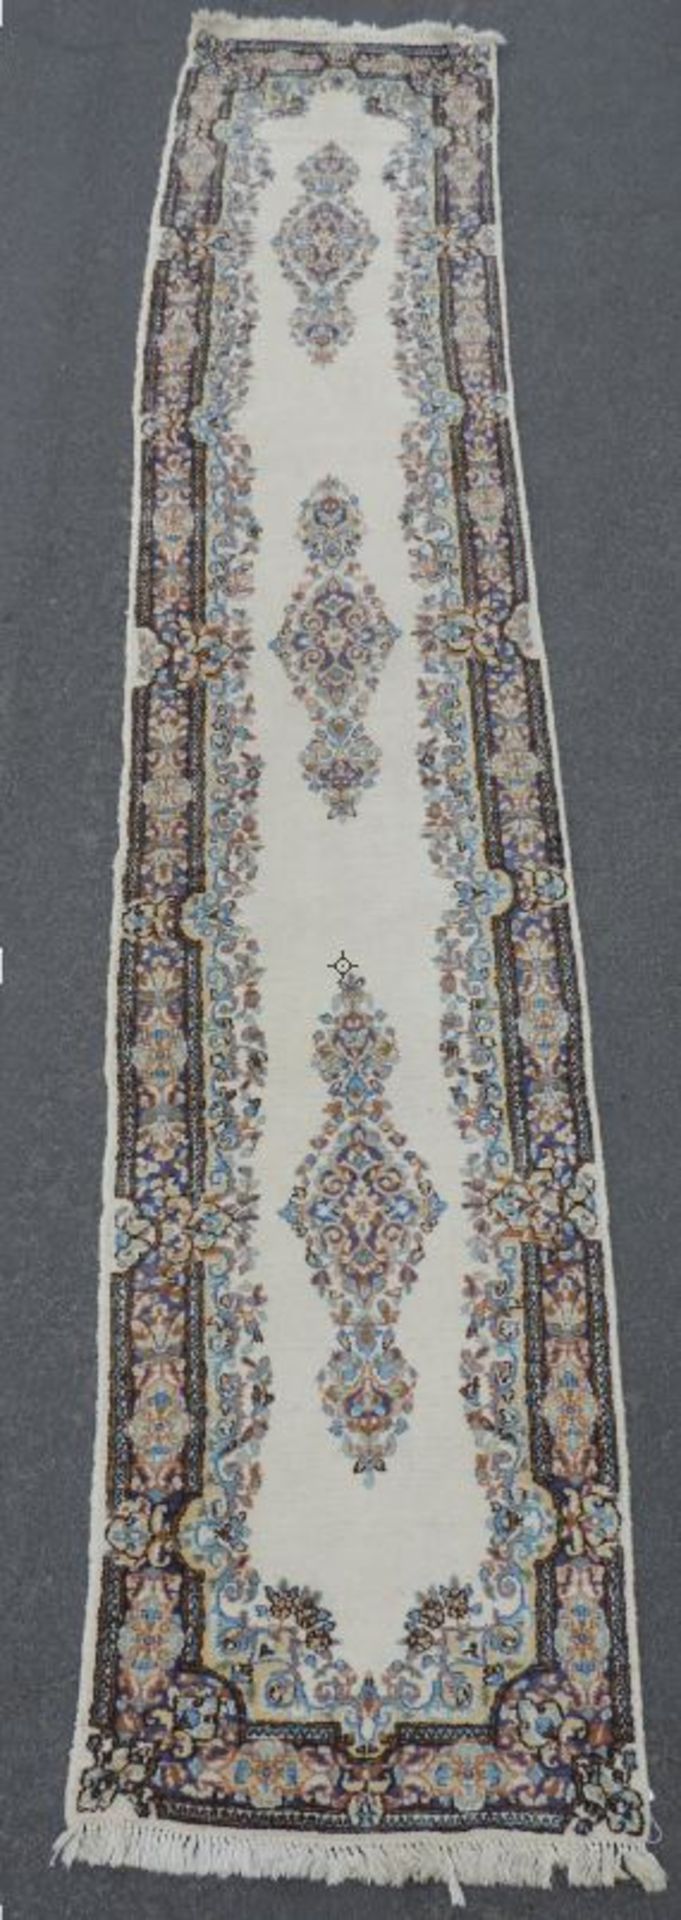 Kirman Persian rug. Narrow runner. Iran.370 cm x 63 cm. Knotted by hand. Wool on cotton. No shipping